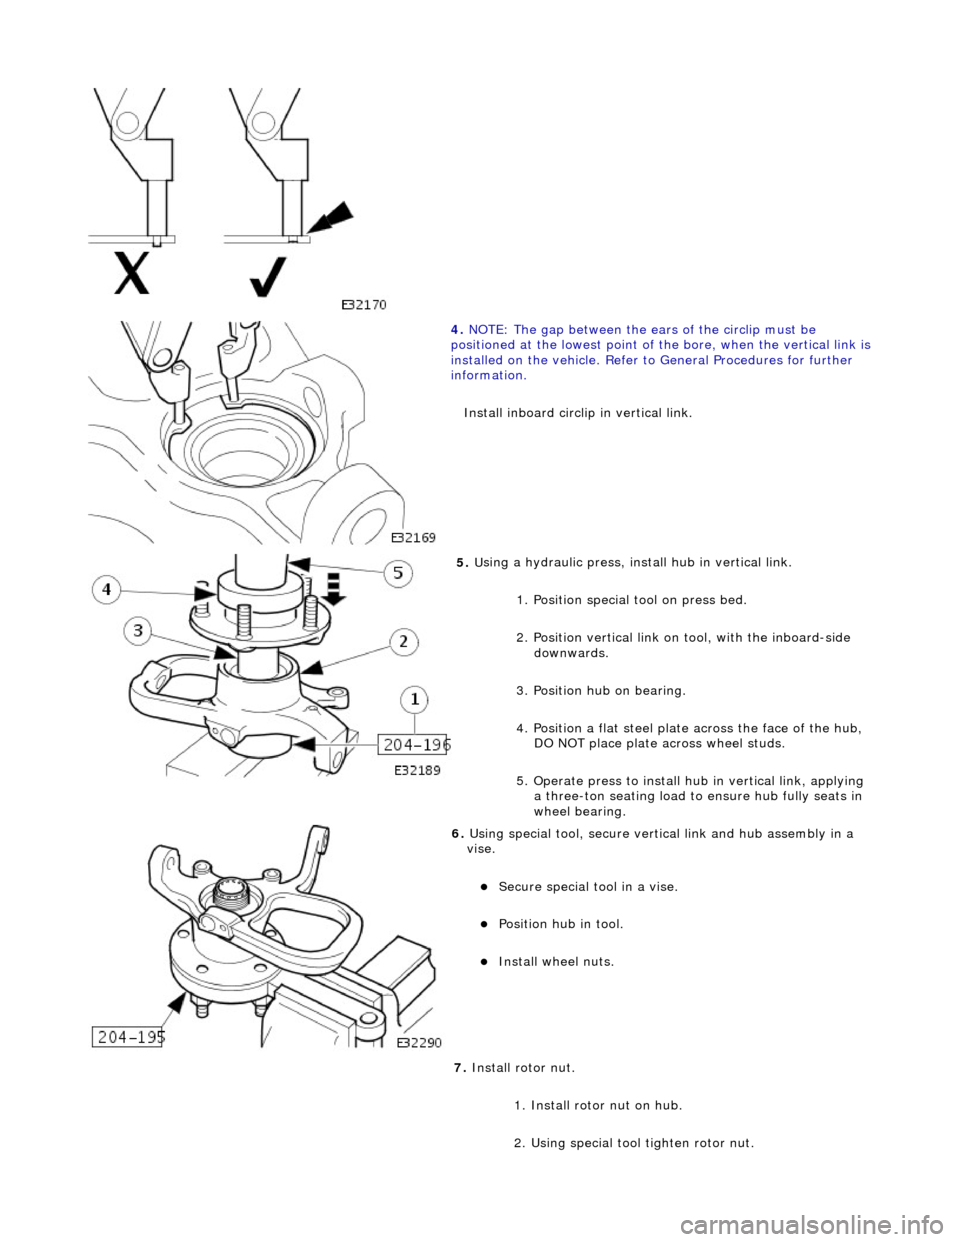 JAGUAR X308 1998 2.G Workshop Manual  
 
4. NOTE
 : The gap between the ears of the circlip must be 
positioned at the lowest point of  the bore, when the vertical link is  
installed on the vehicl e. Refer to General Procedures for furt